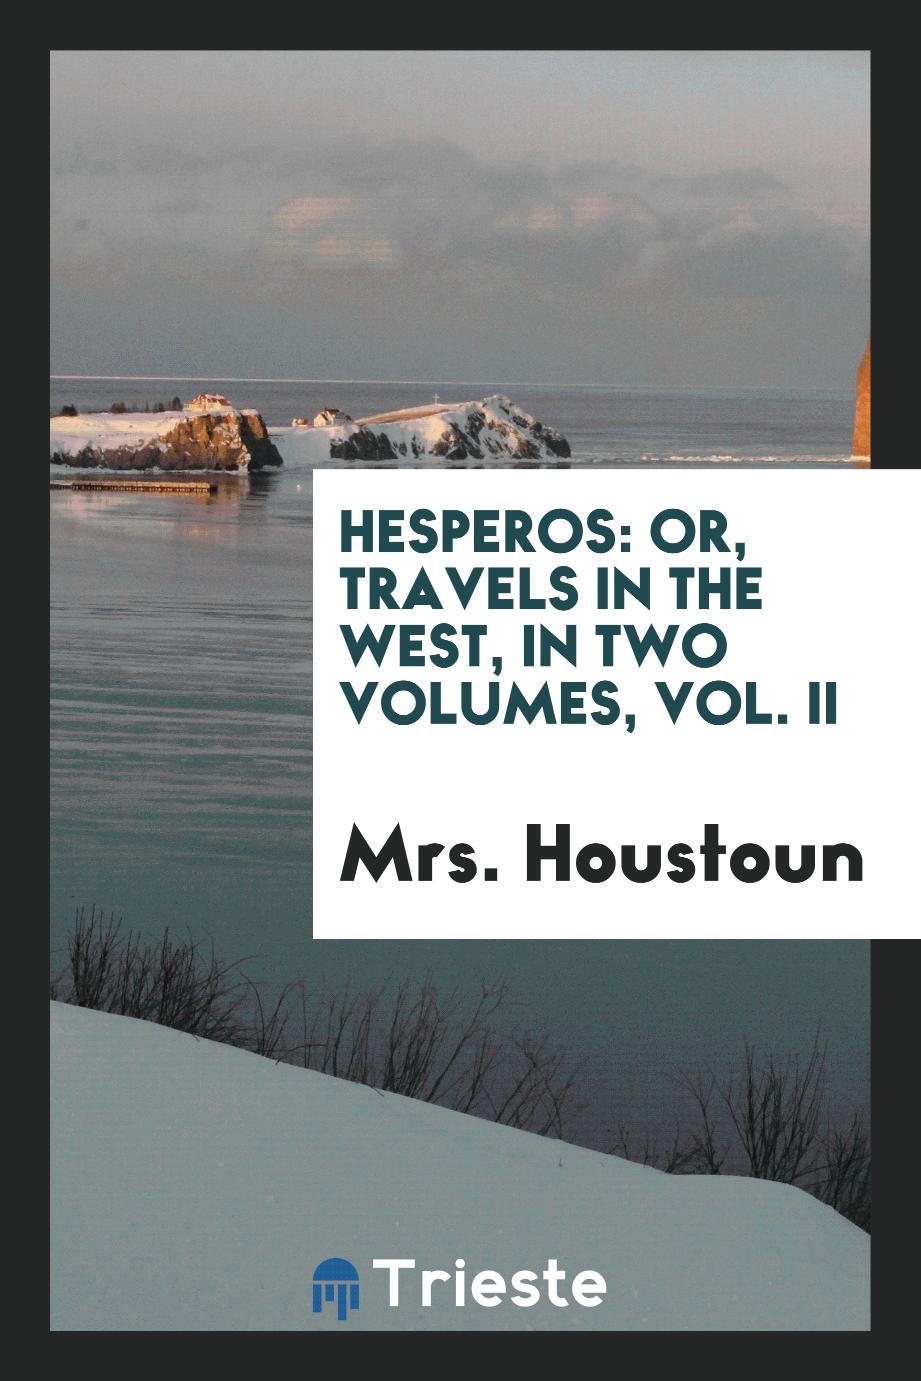 Hesperos: Or, Travels in the West, in Two Volumes, Vol. II